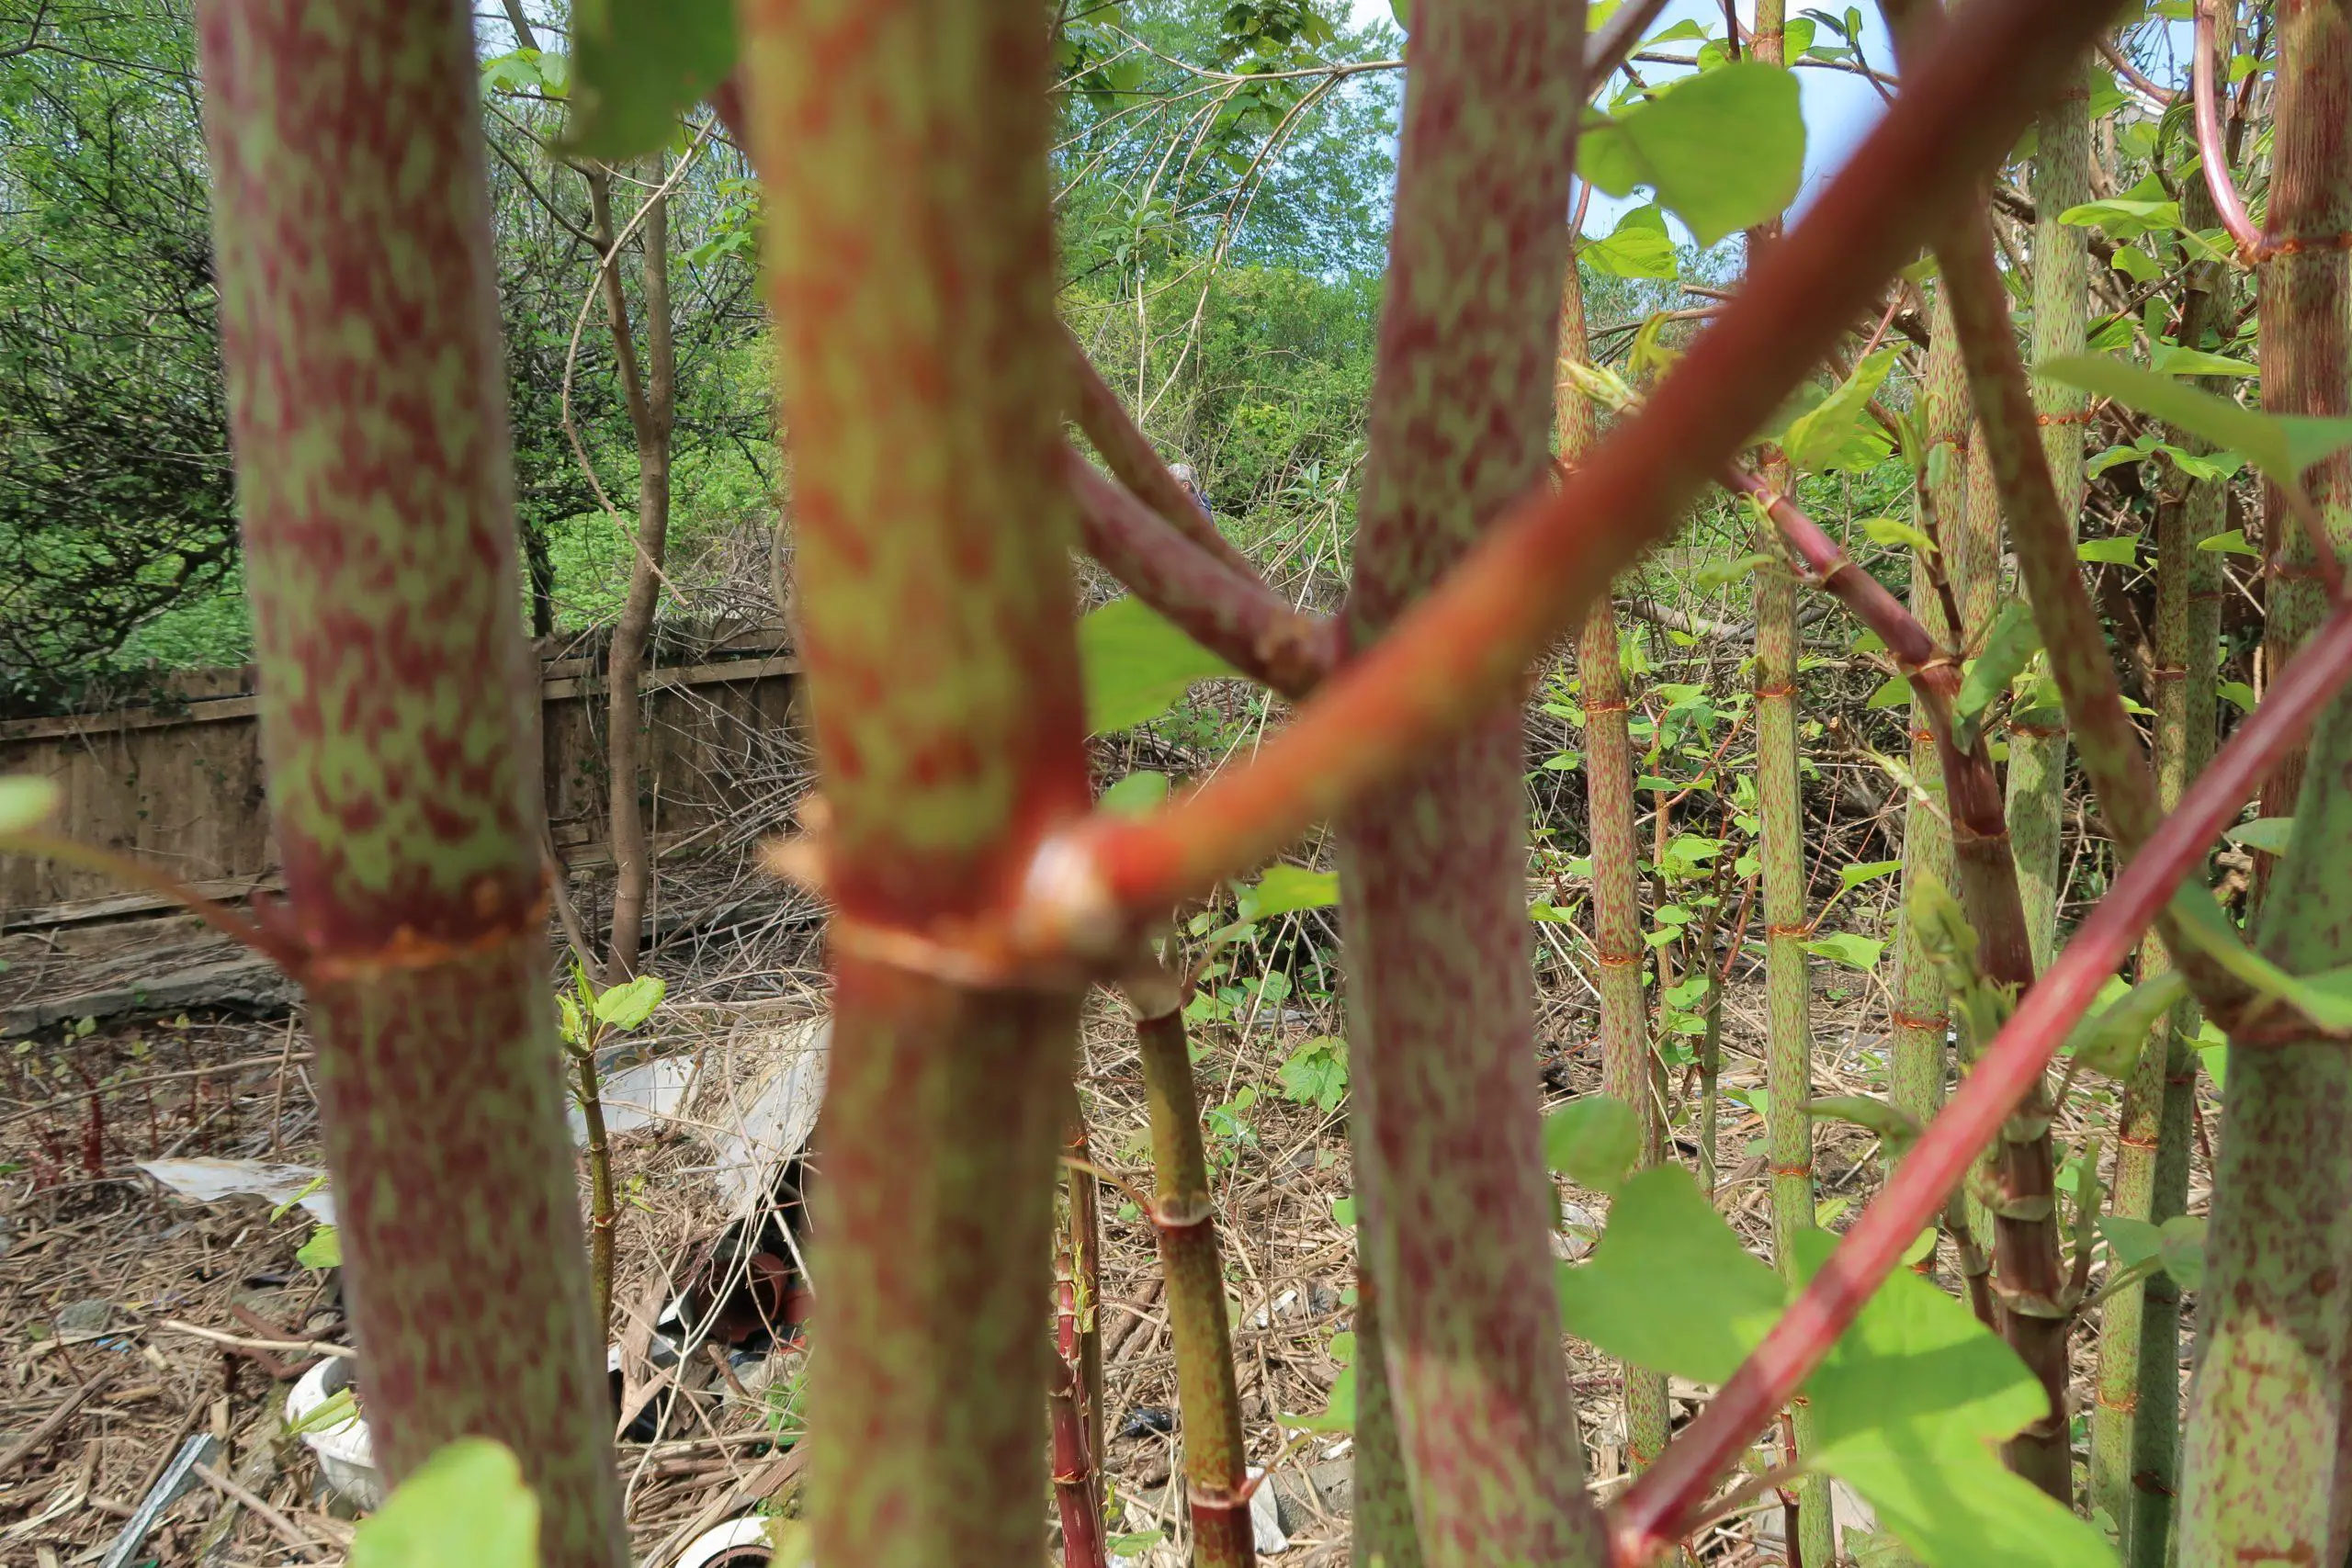 Another effective form of killing Japanese knotweed is via injecting herbicide into the stems directly